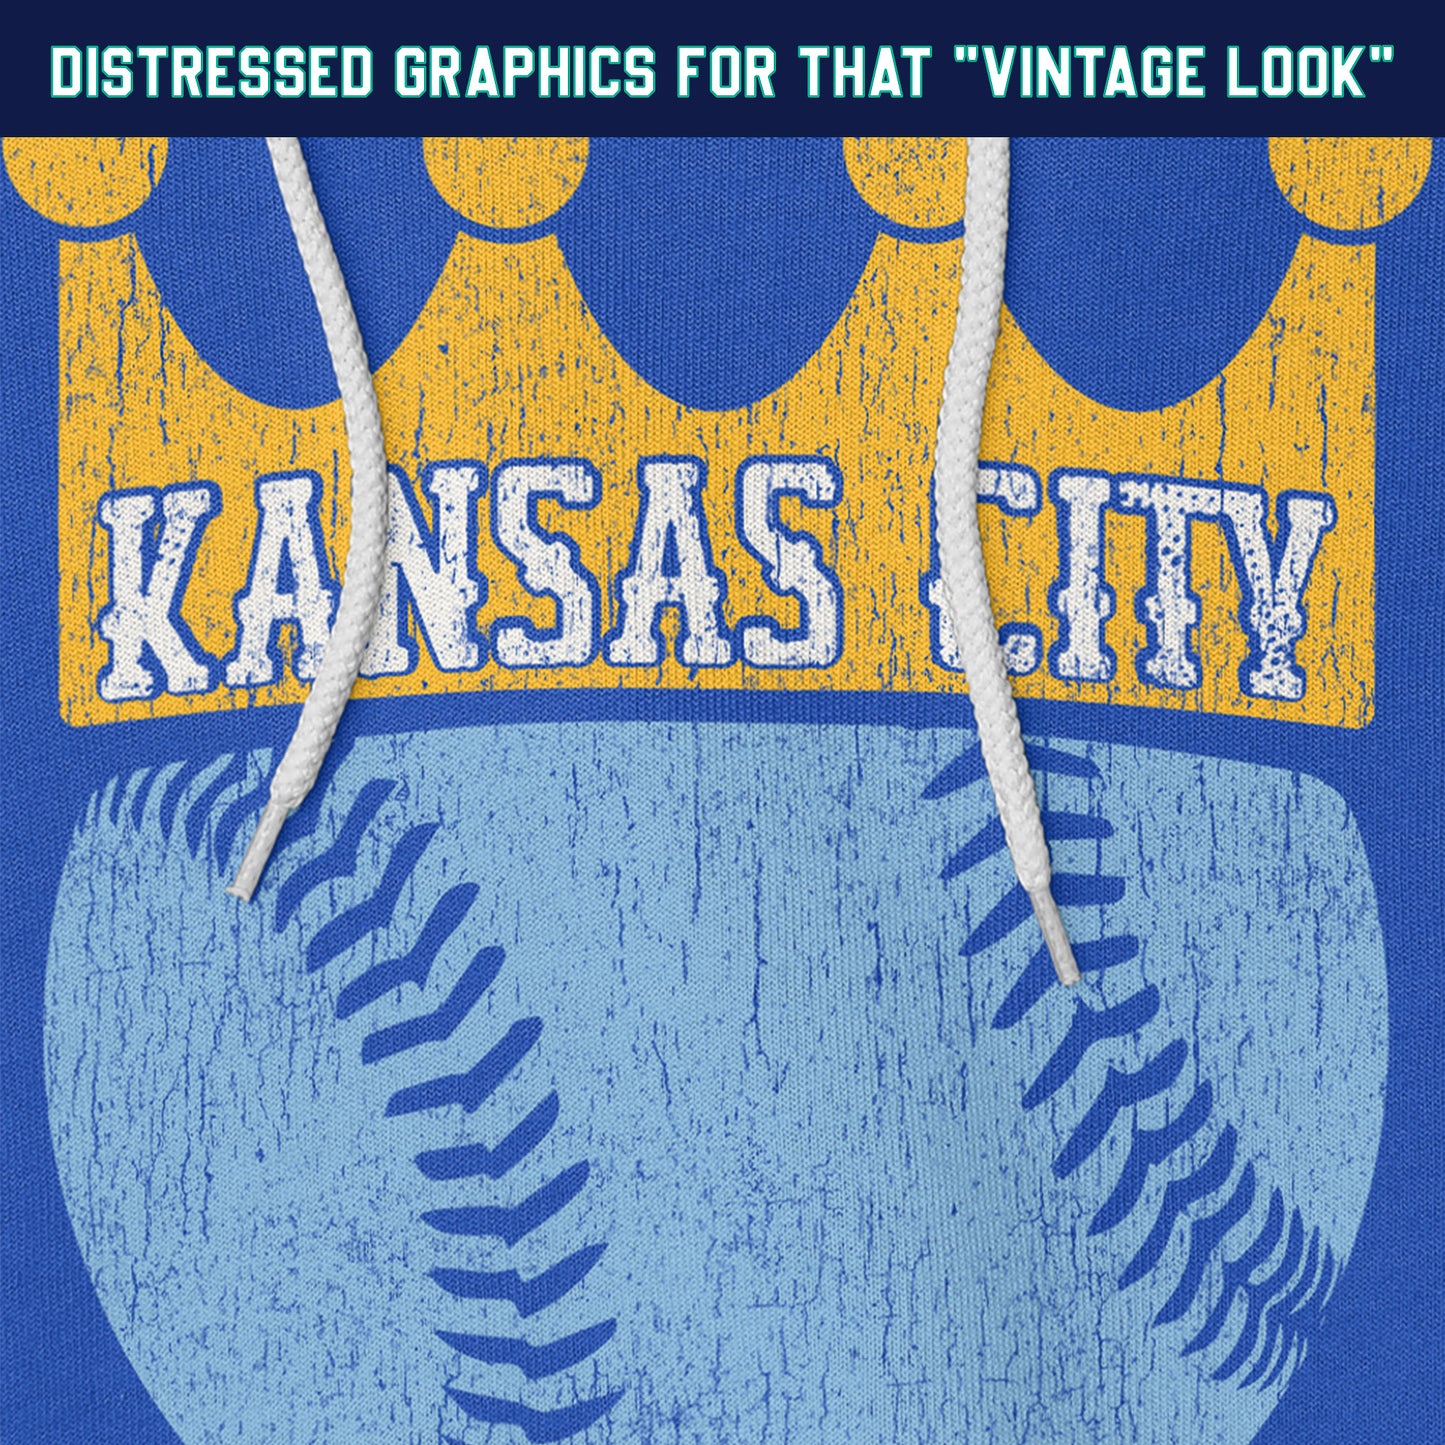 KC Swag Kansas City Royals powder blue baseball wearing a gold crown with KANSAS CITY text on royal blue pull-over hoodie closeup details of distressed graphics